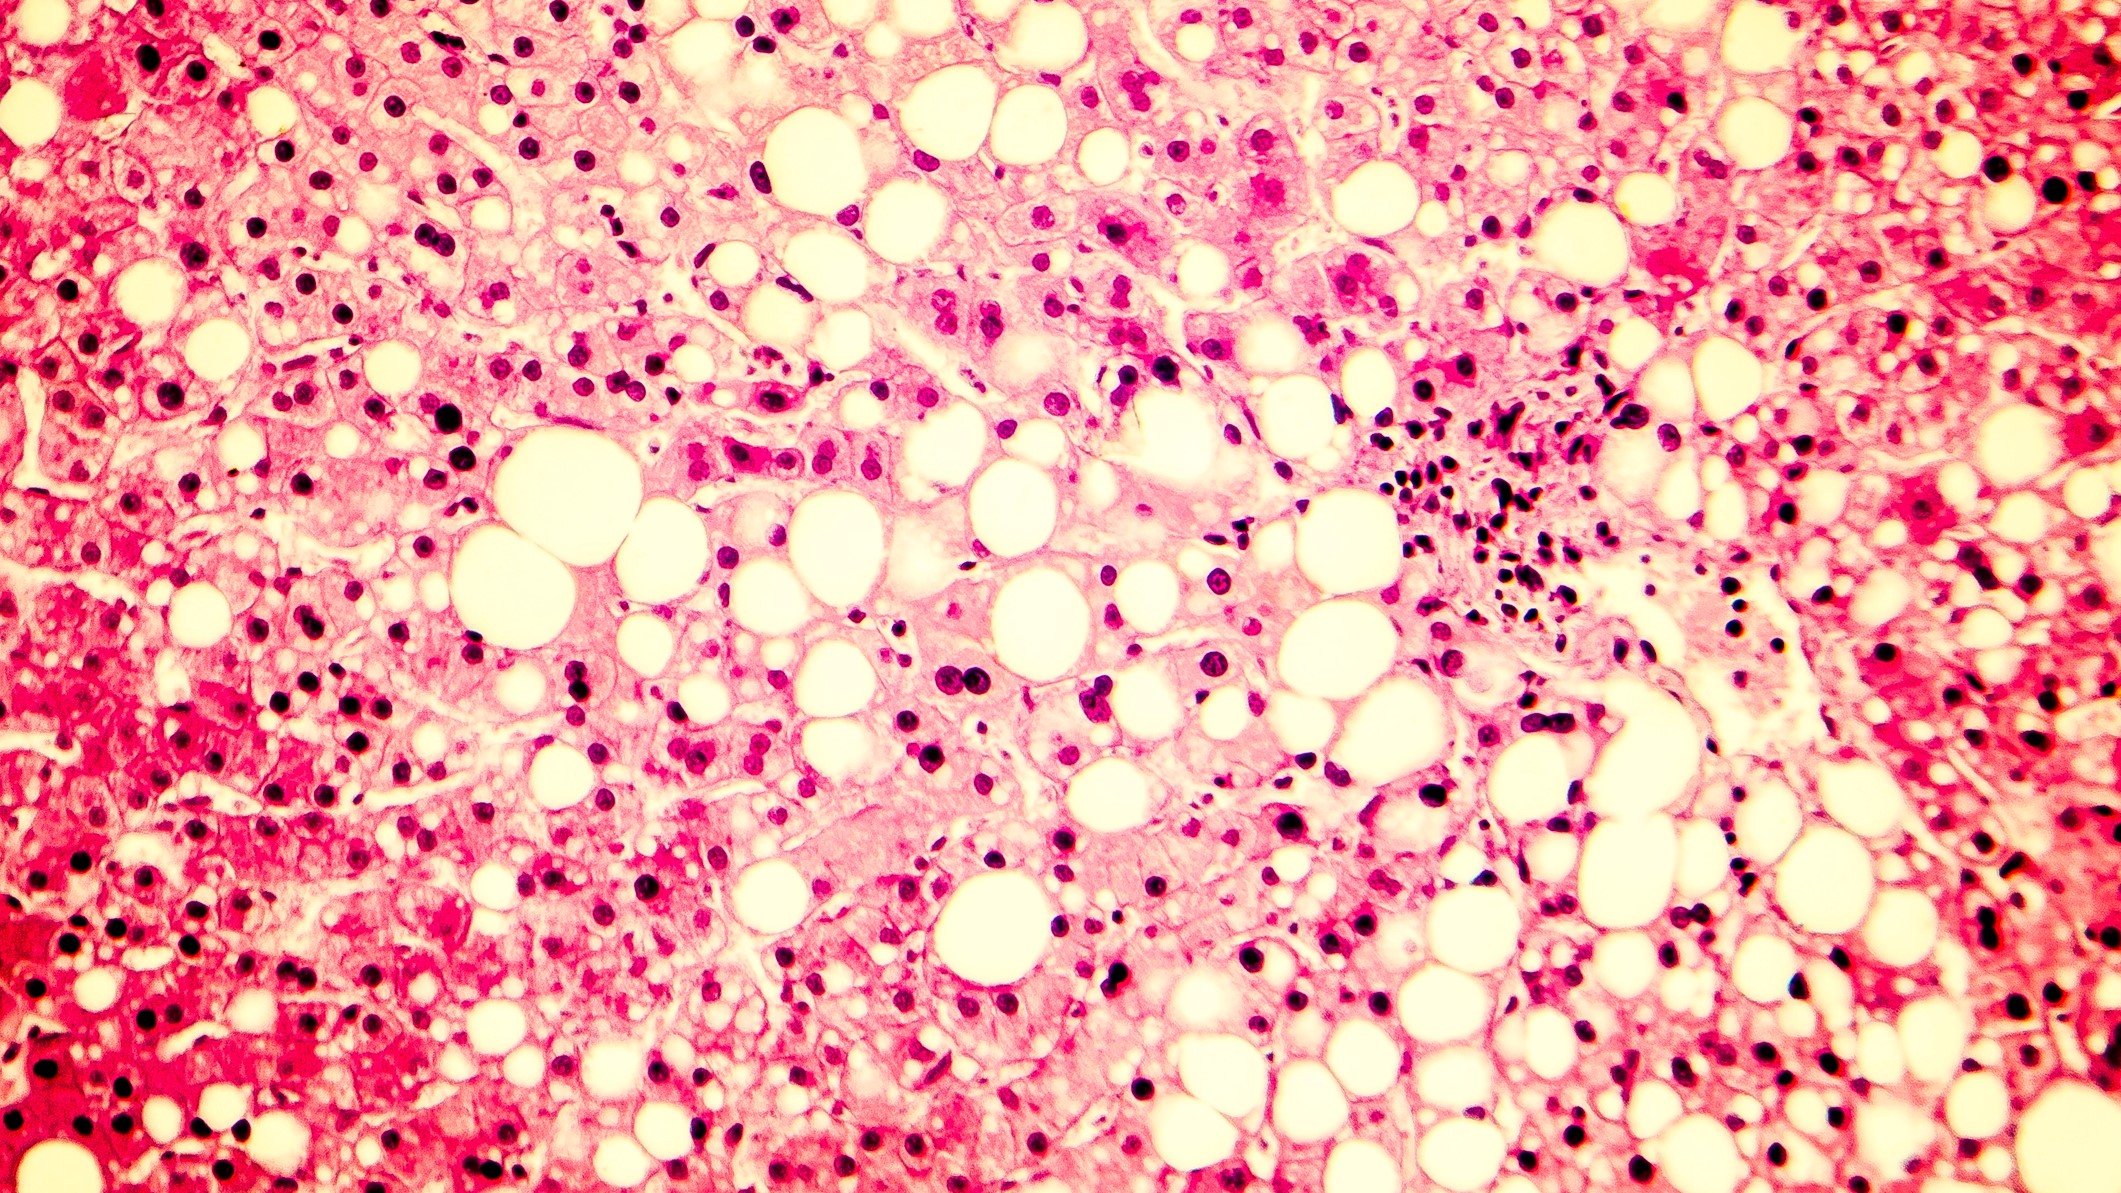 Fatty liver liver steatosis large vacuoles of triglyceride fat